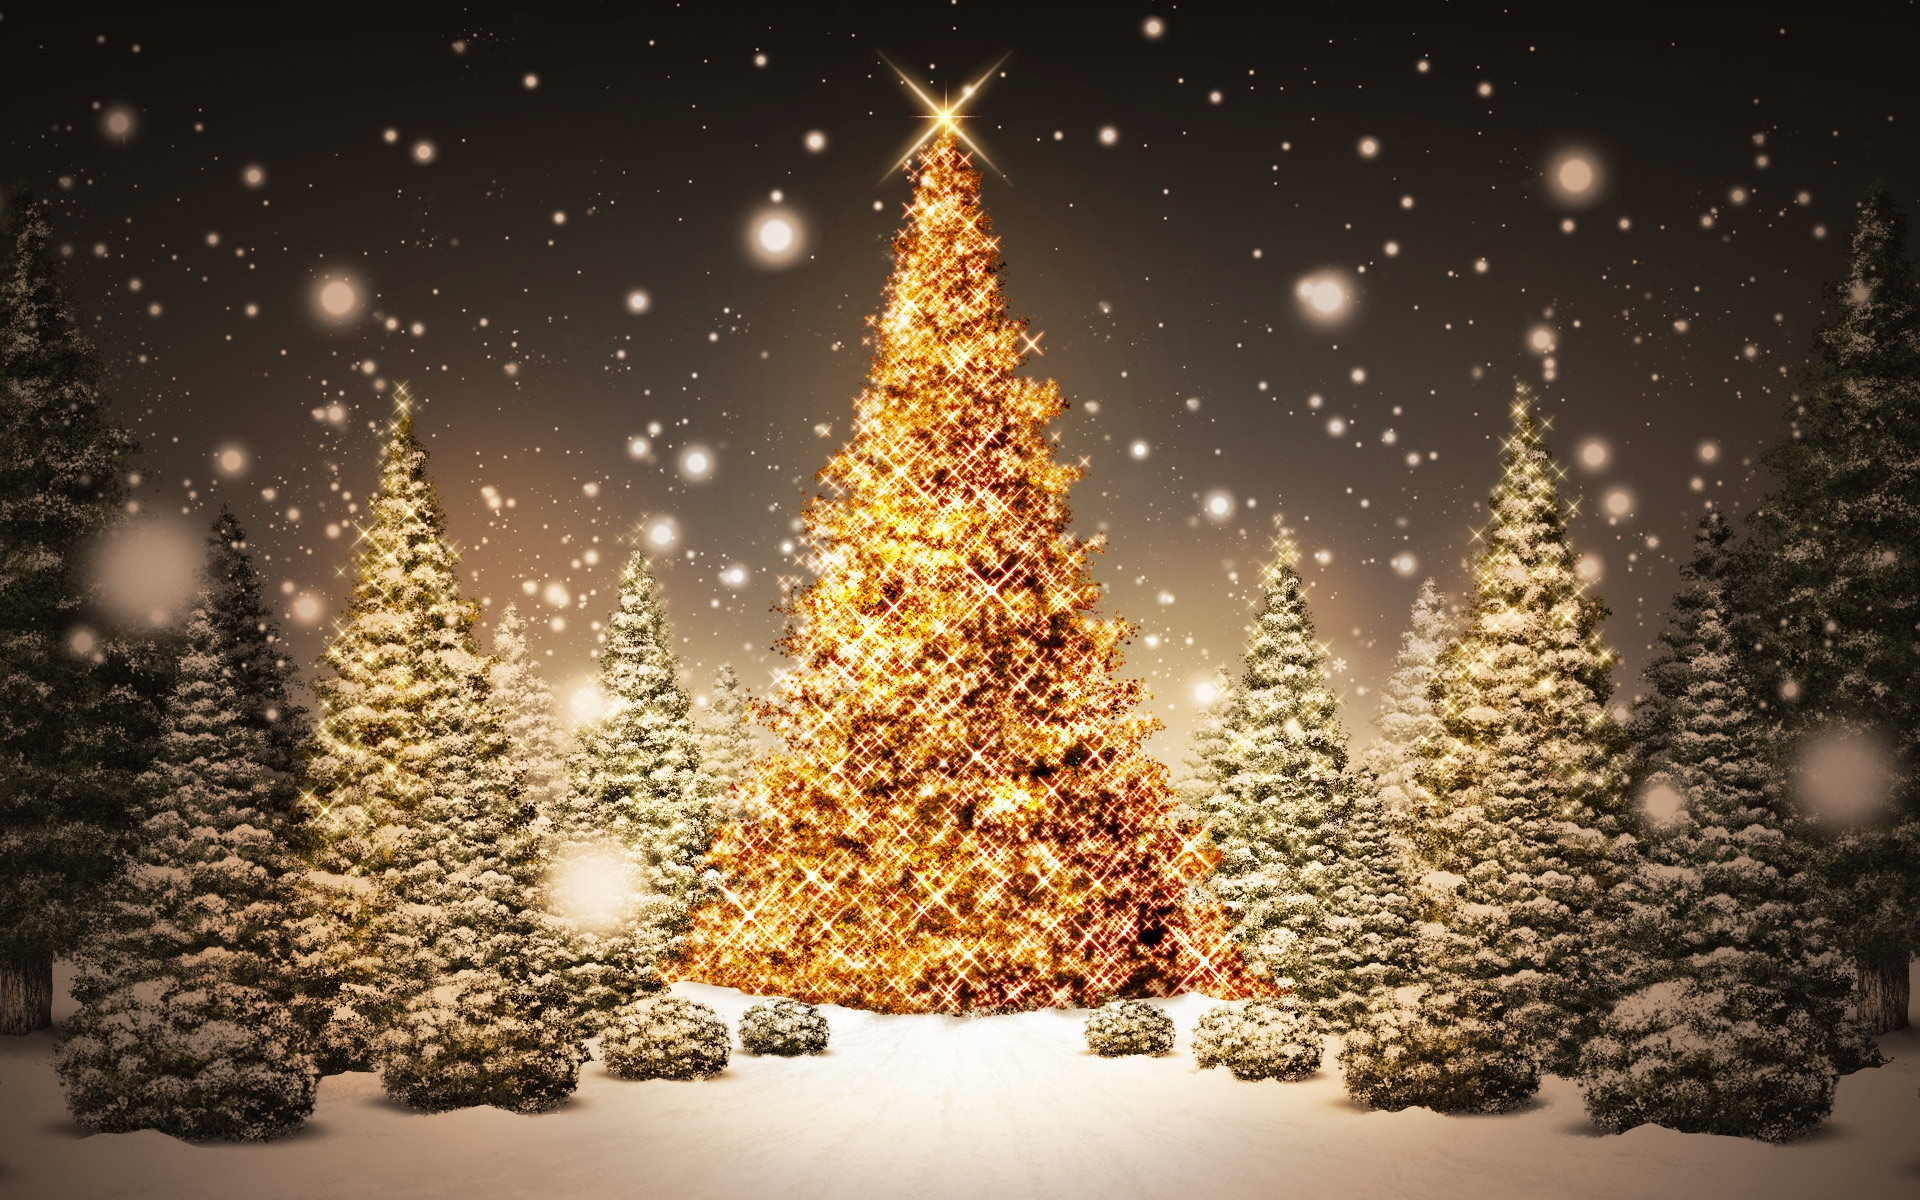 Free download 3d Christmas Tree Wallpapers Free 3d Christmas Tree